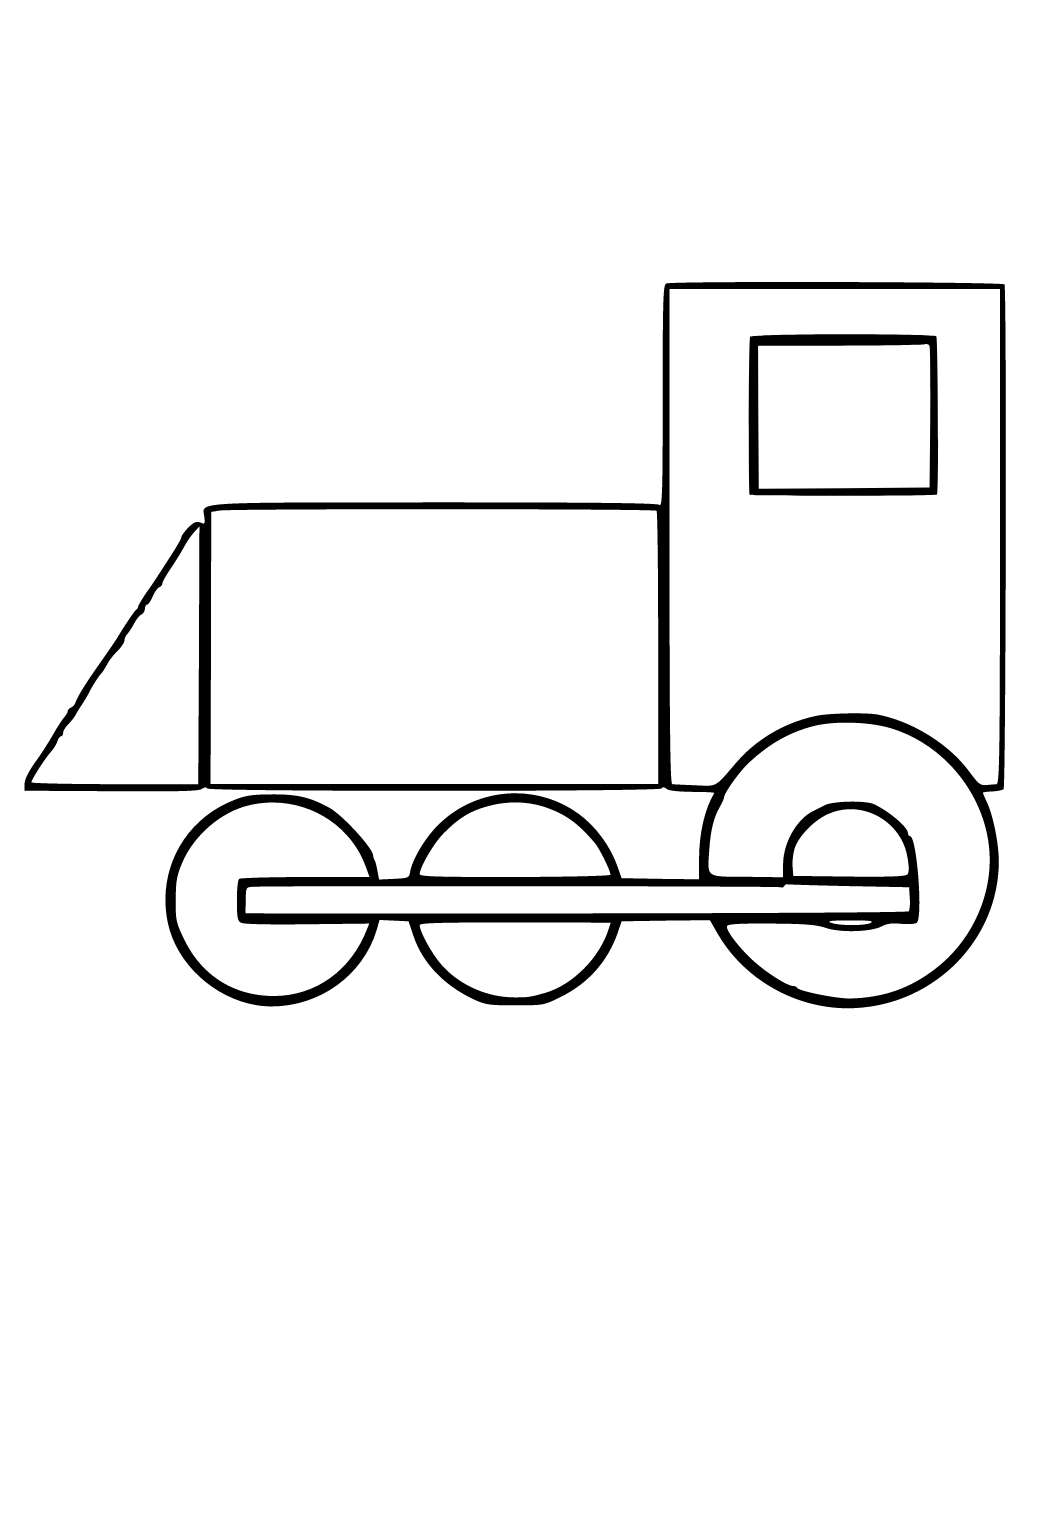 Free Printable Shapes Train Coloring Page for Adults and Kids - Lystok.com